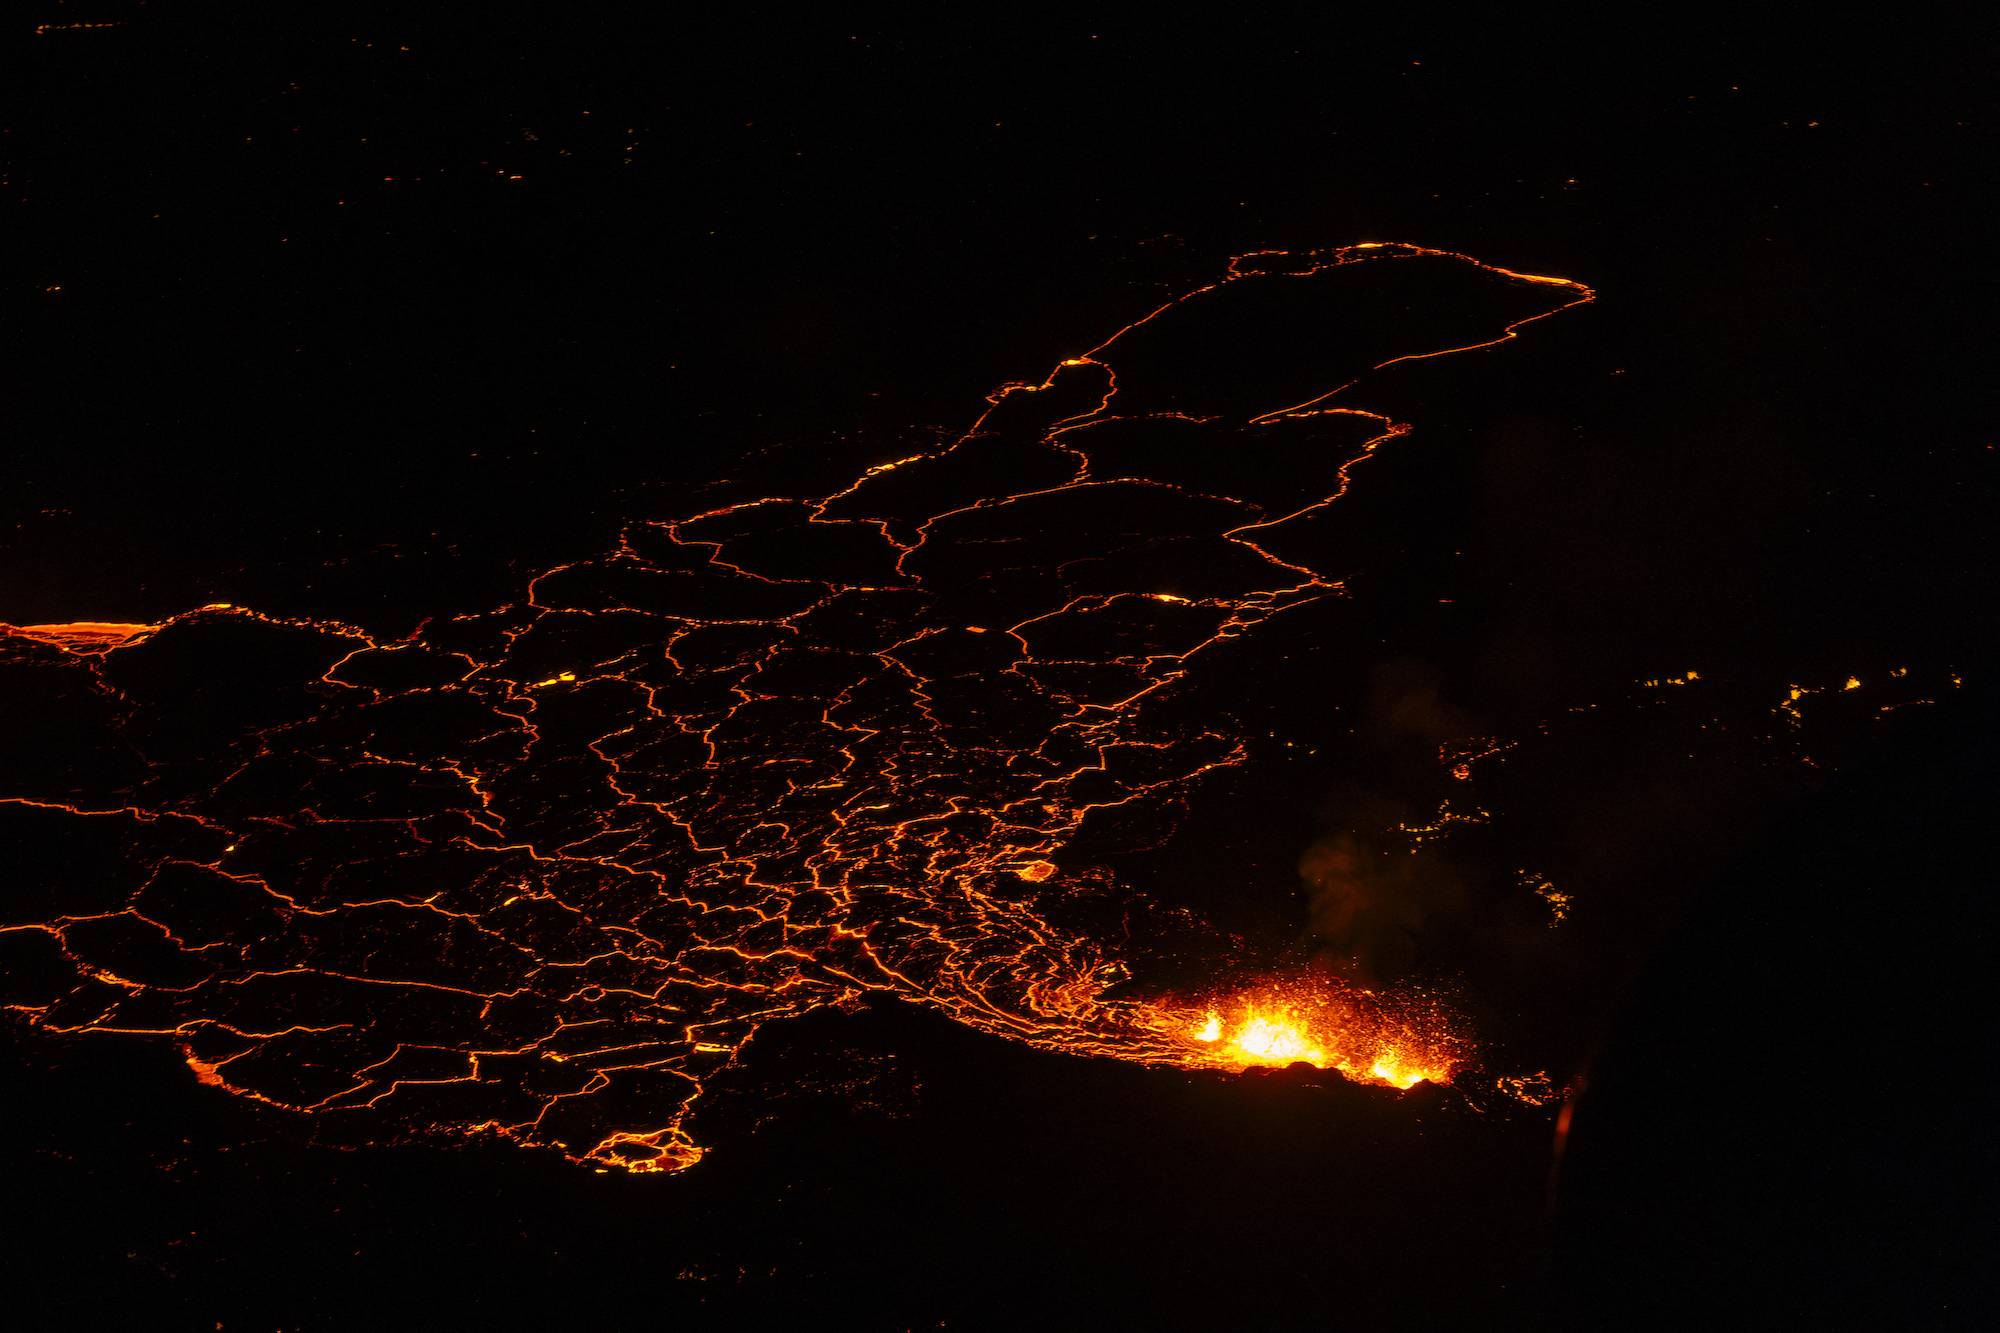 Molten lava is seen exiting a fissure on the Reykjanes peninsula on Tuesday.